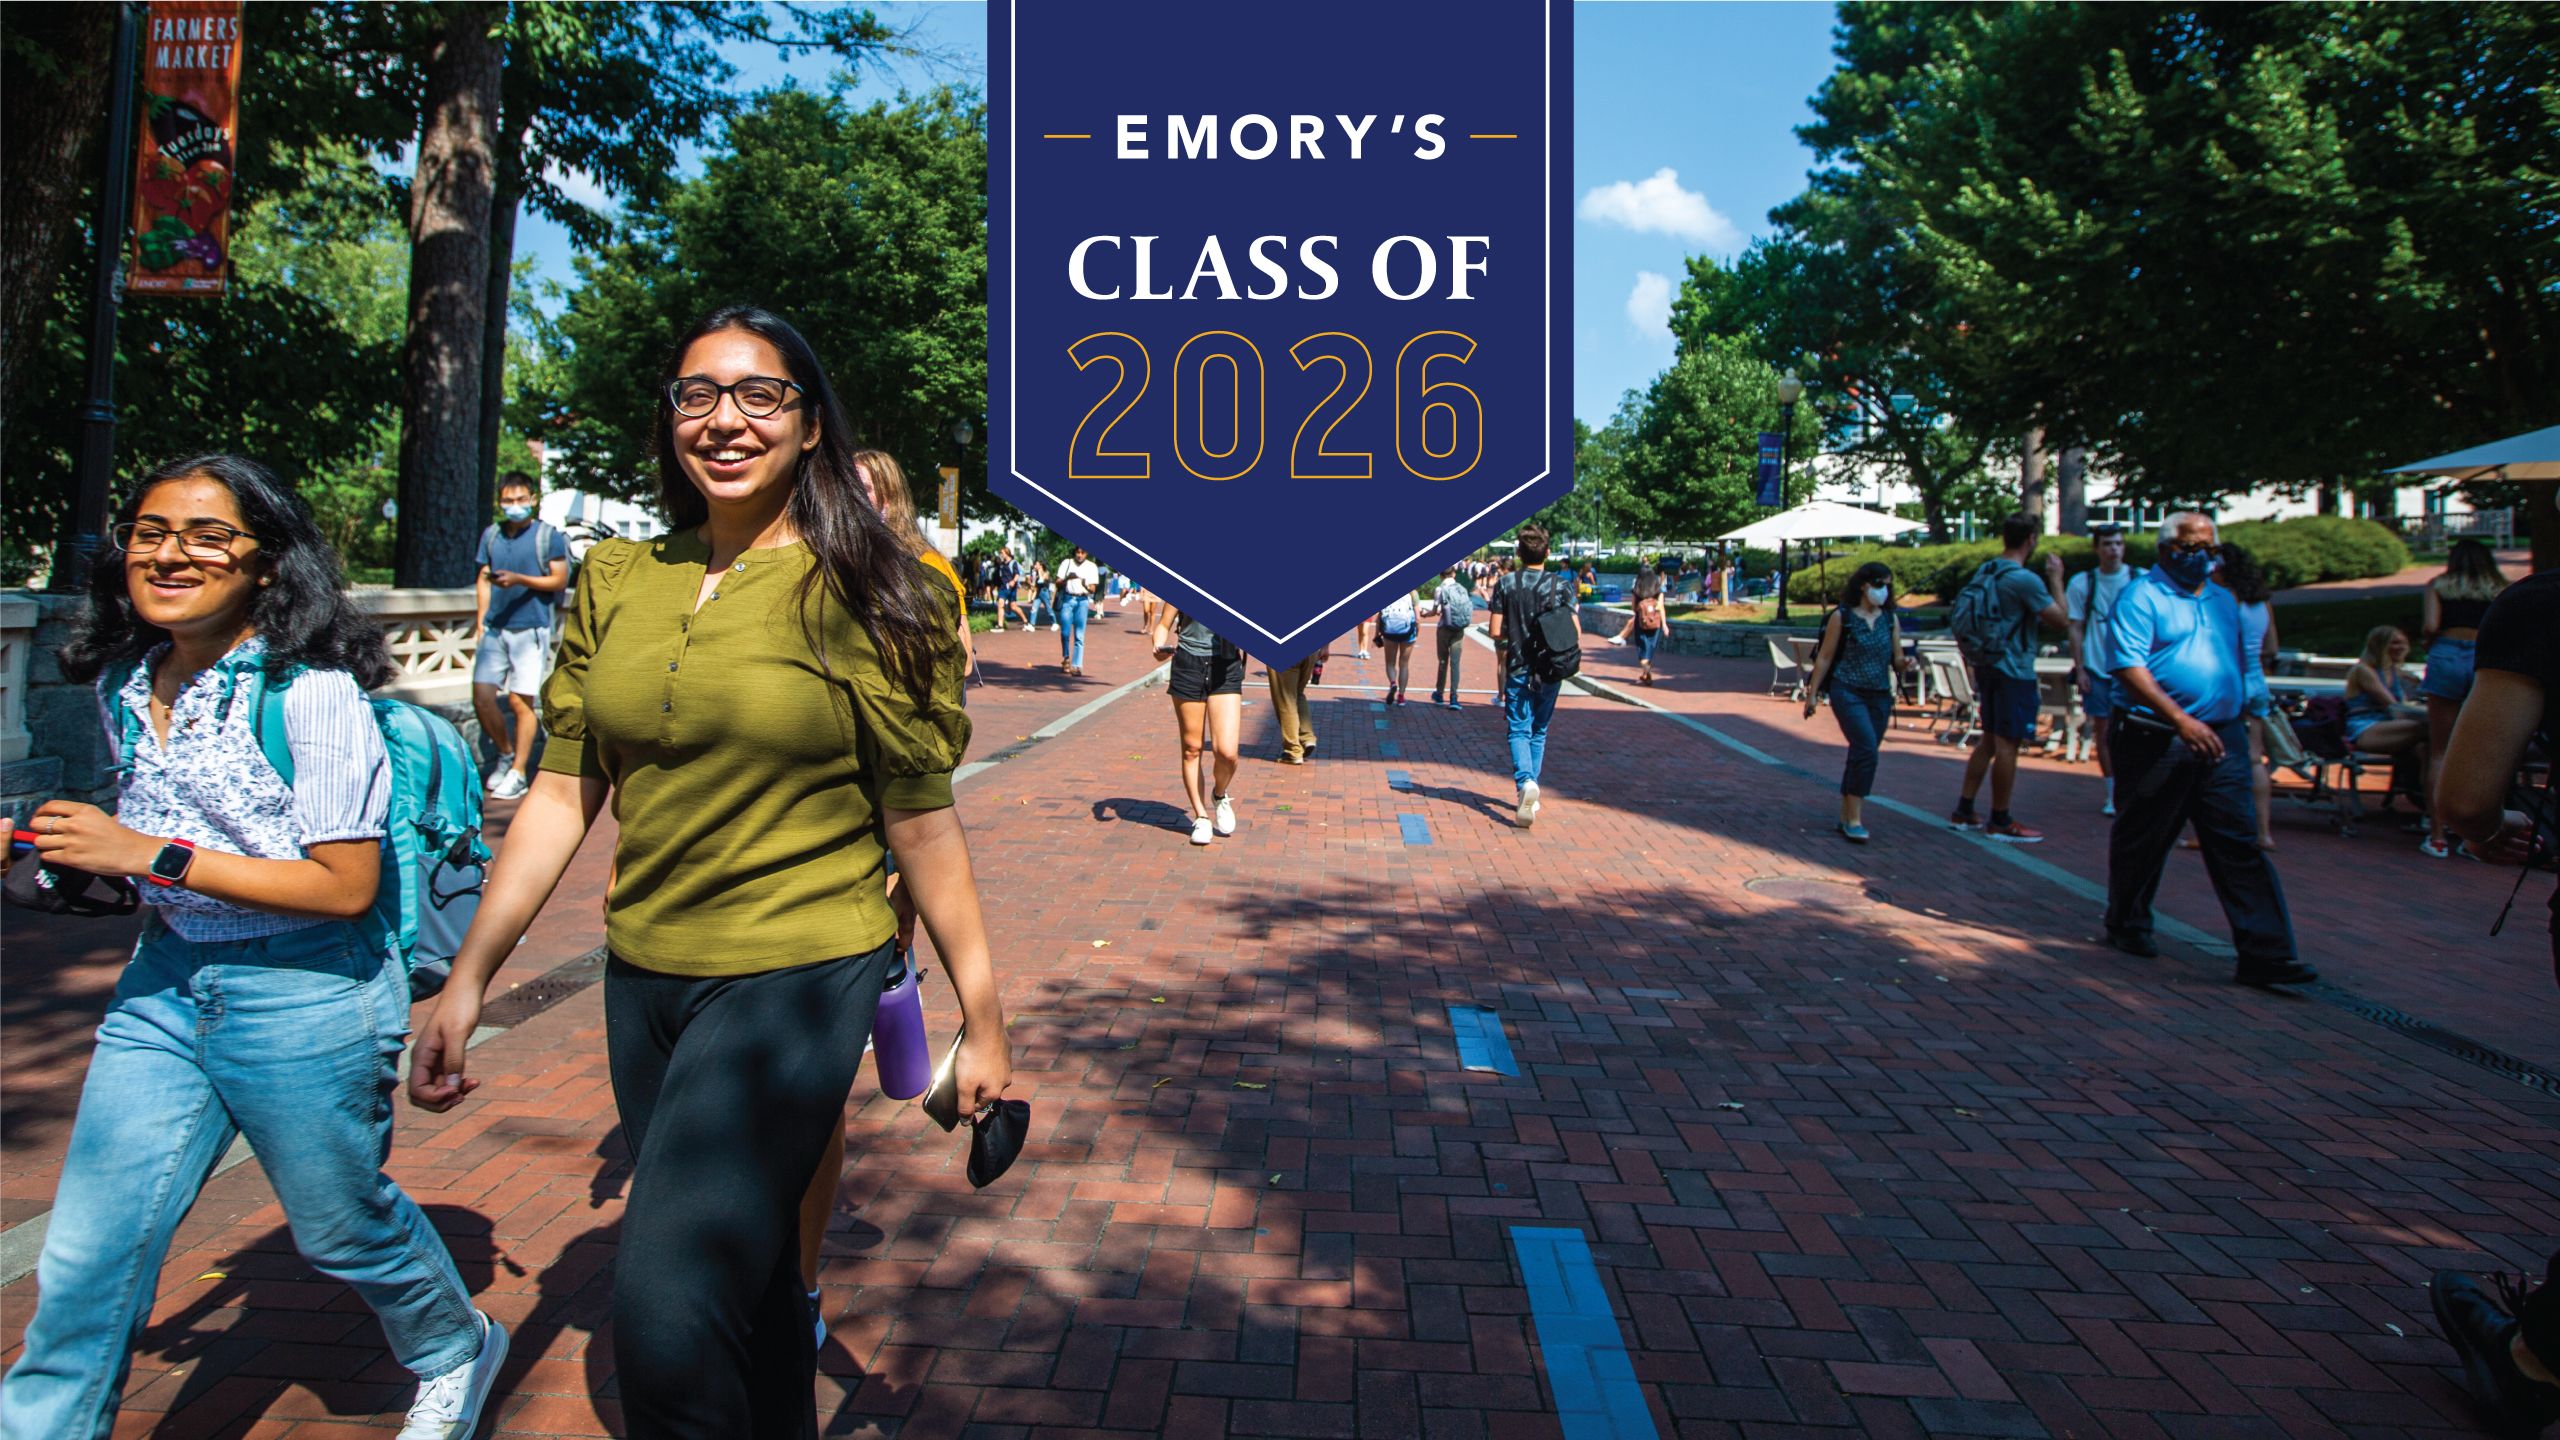 Emory's Class of 2025 with background photo of two students walking on a sidewalk